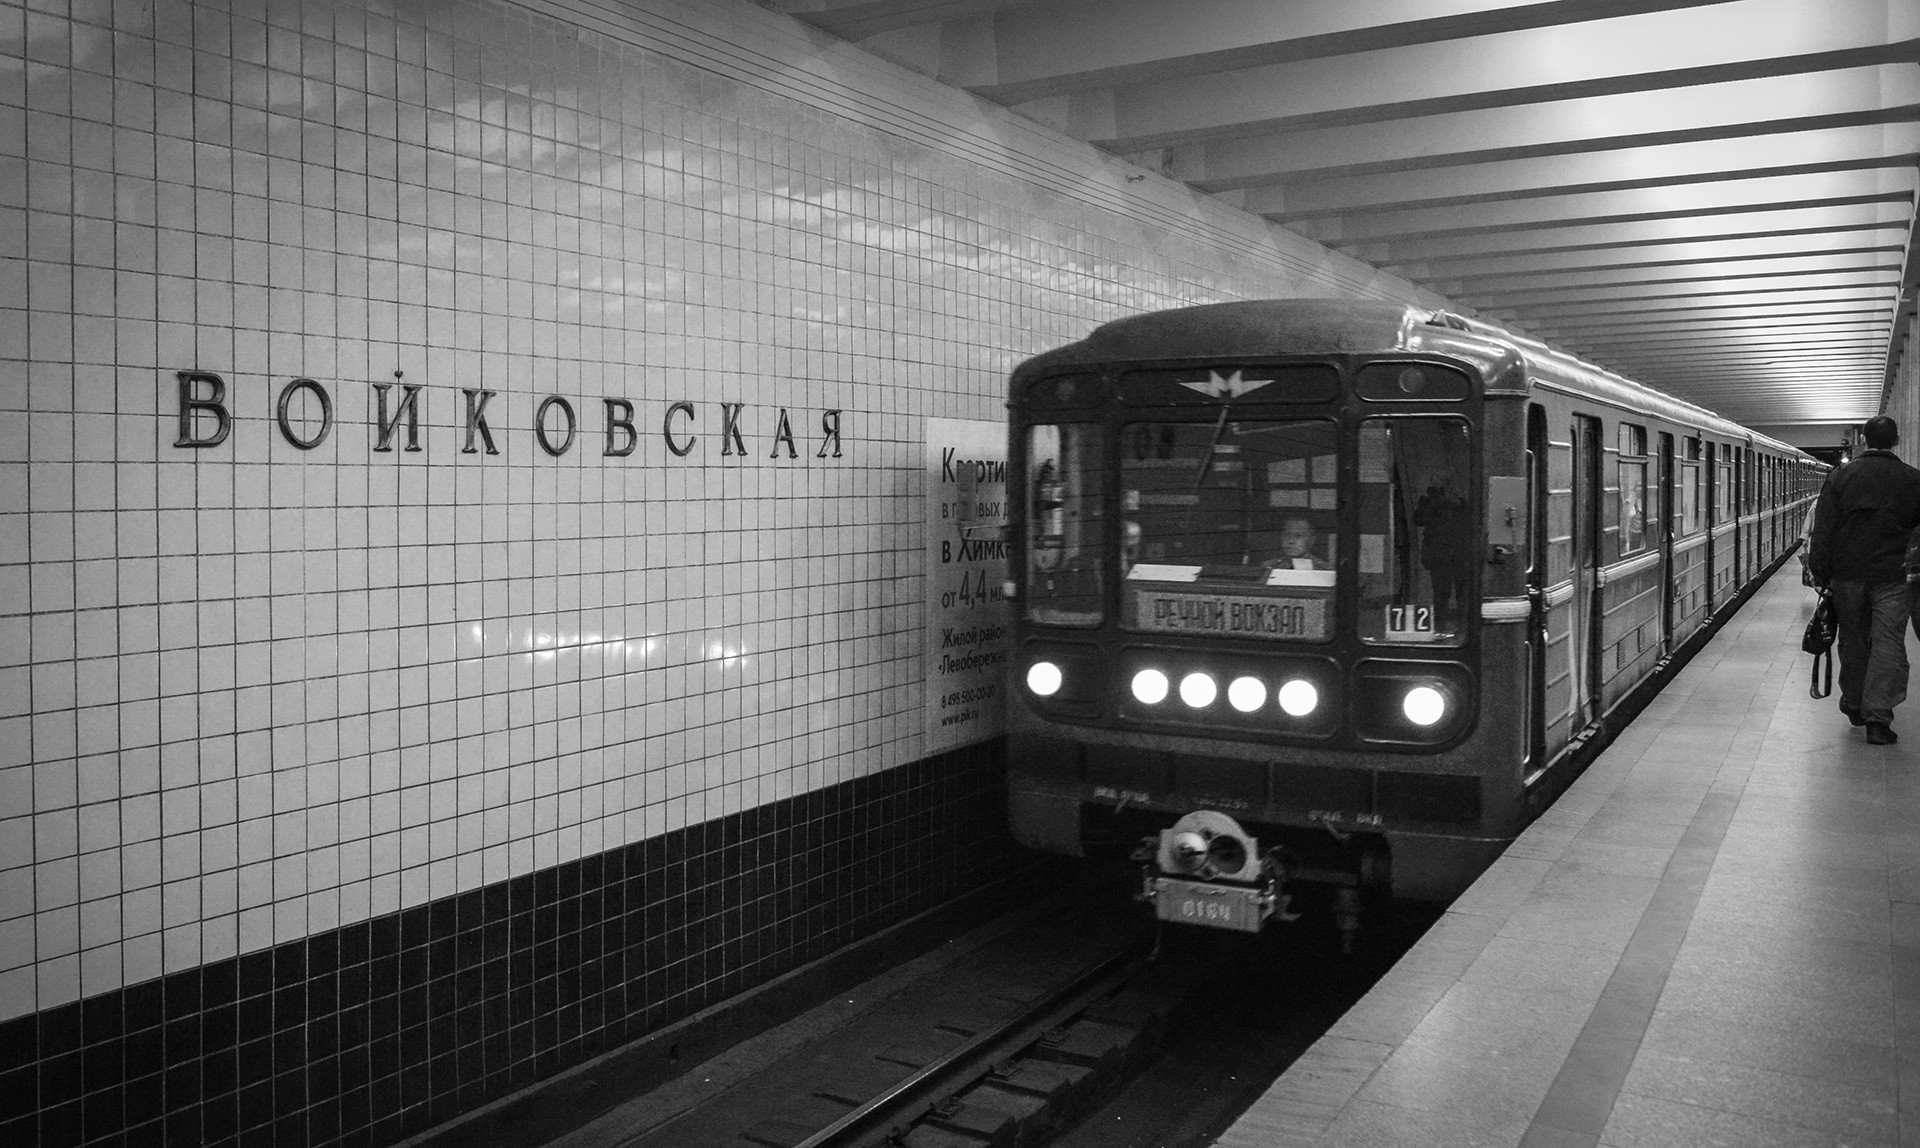 A train arrives at Voykovskaya metro station in Moscow. There is nothing special about the station except for its controversial name.